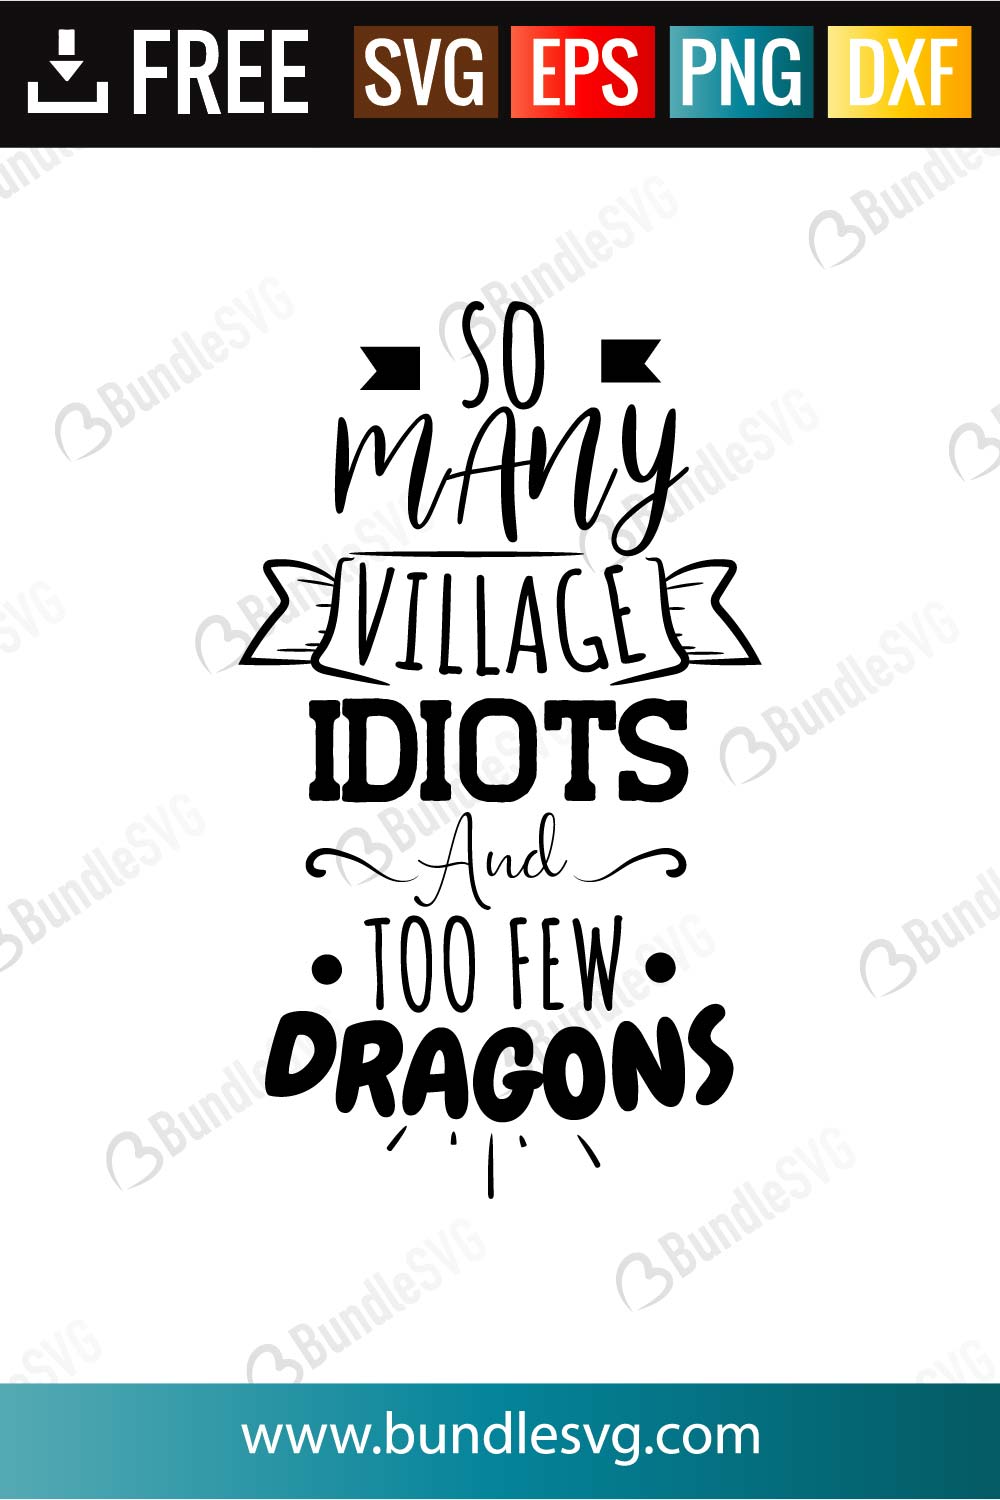 Download So Many Village Idiots And To Few Dragons Svg Cut Files Bundlesvg